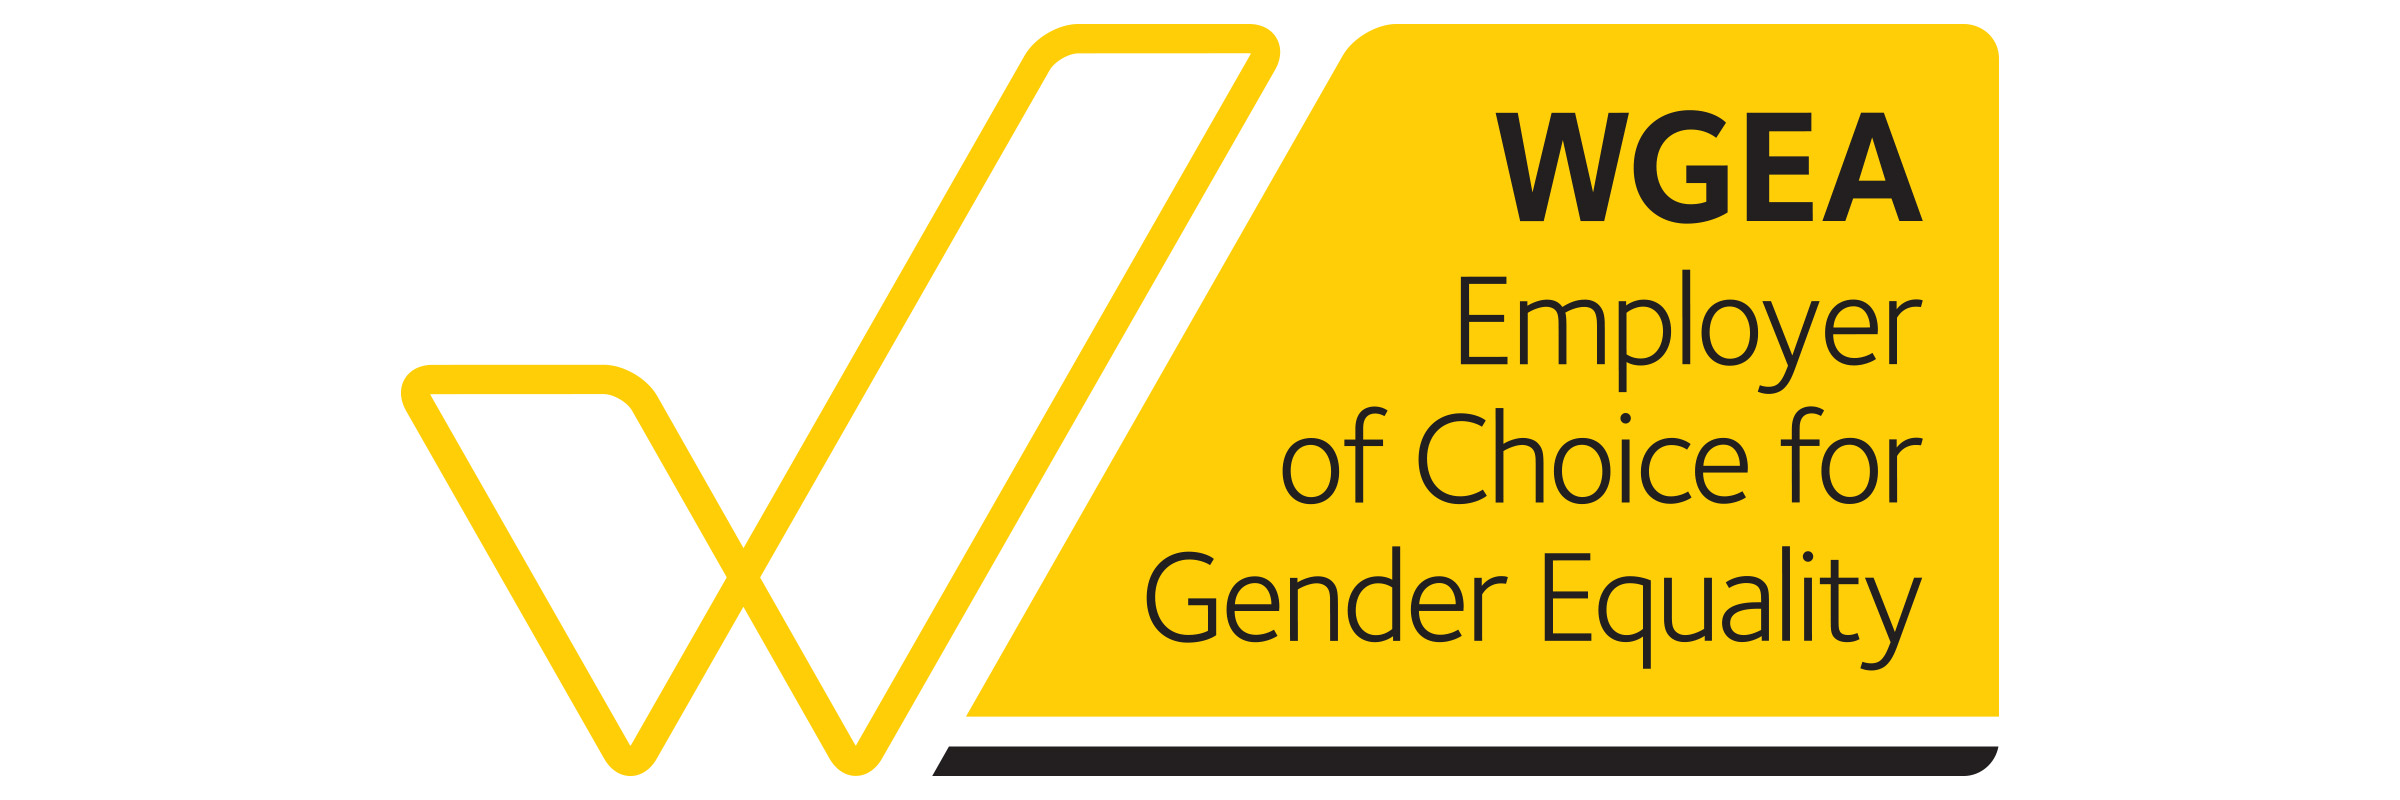 We're named an Employer of Choice for Gender Equality  Hero Image